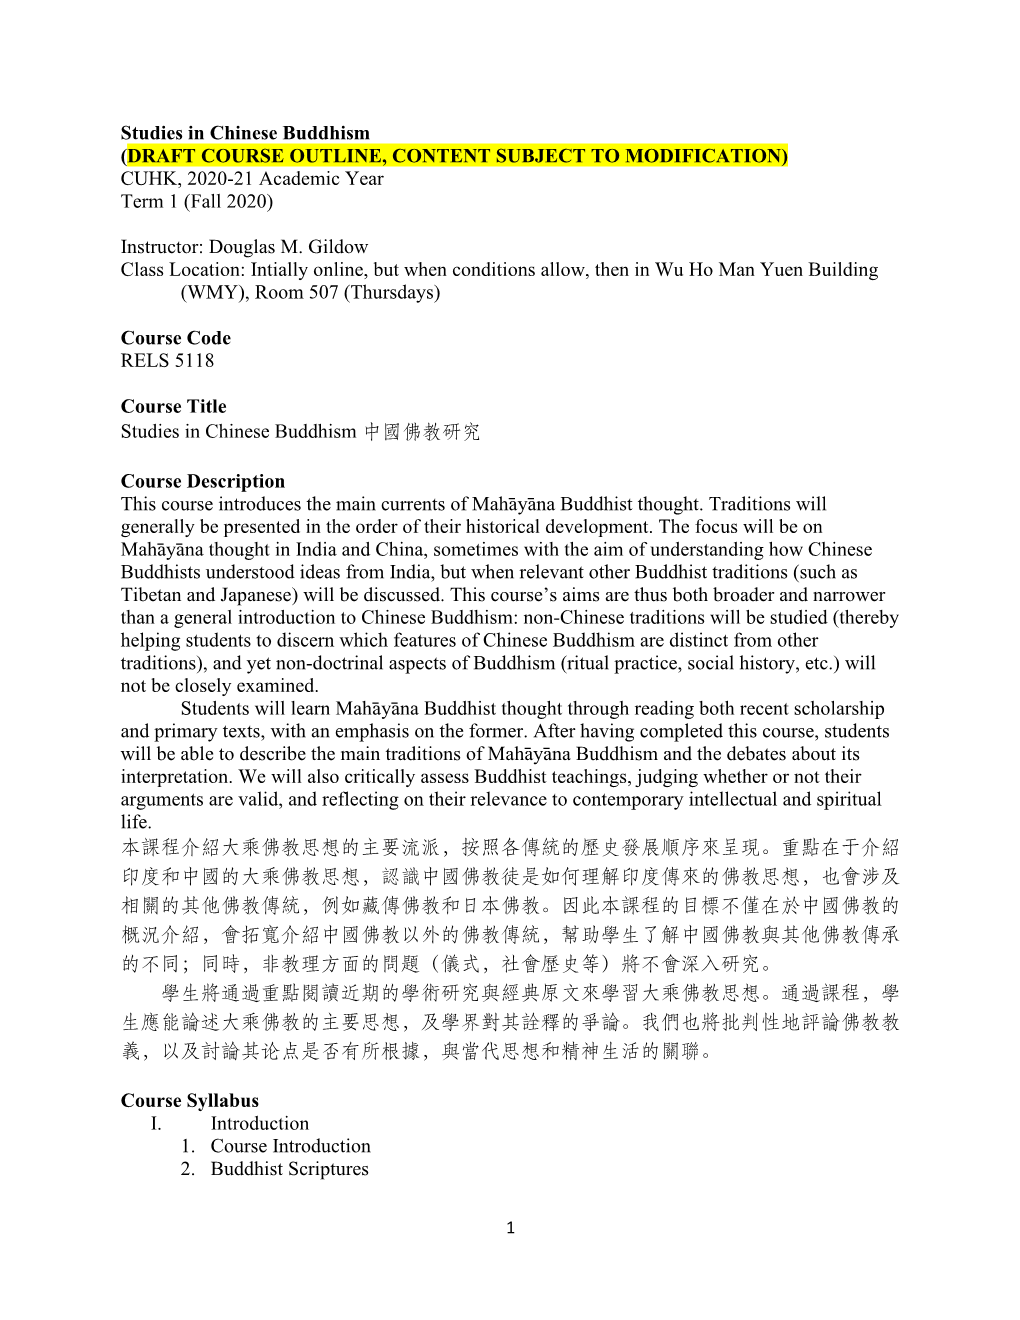 Studies in Chinese Buddhism (DRAFT COURSE OUTLINE, CONTENT SUBJECT to MODIFICATION) CUHK, 2020-21 Academic Year Term 1 (Fall 2020)